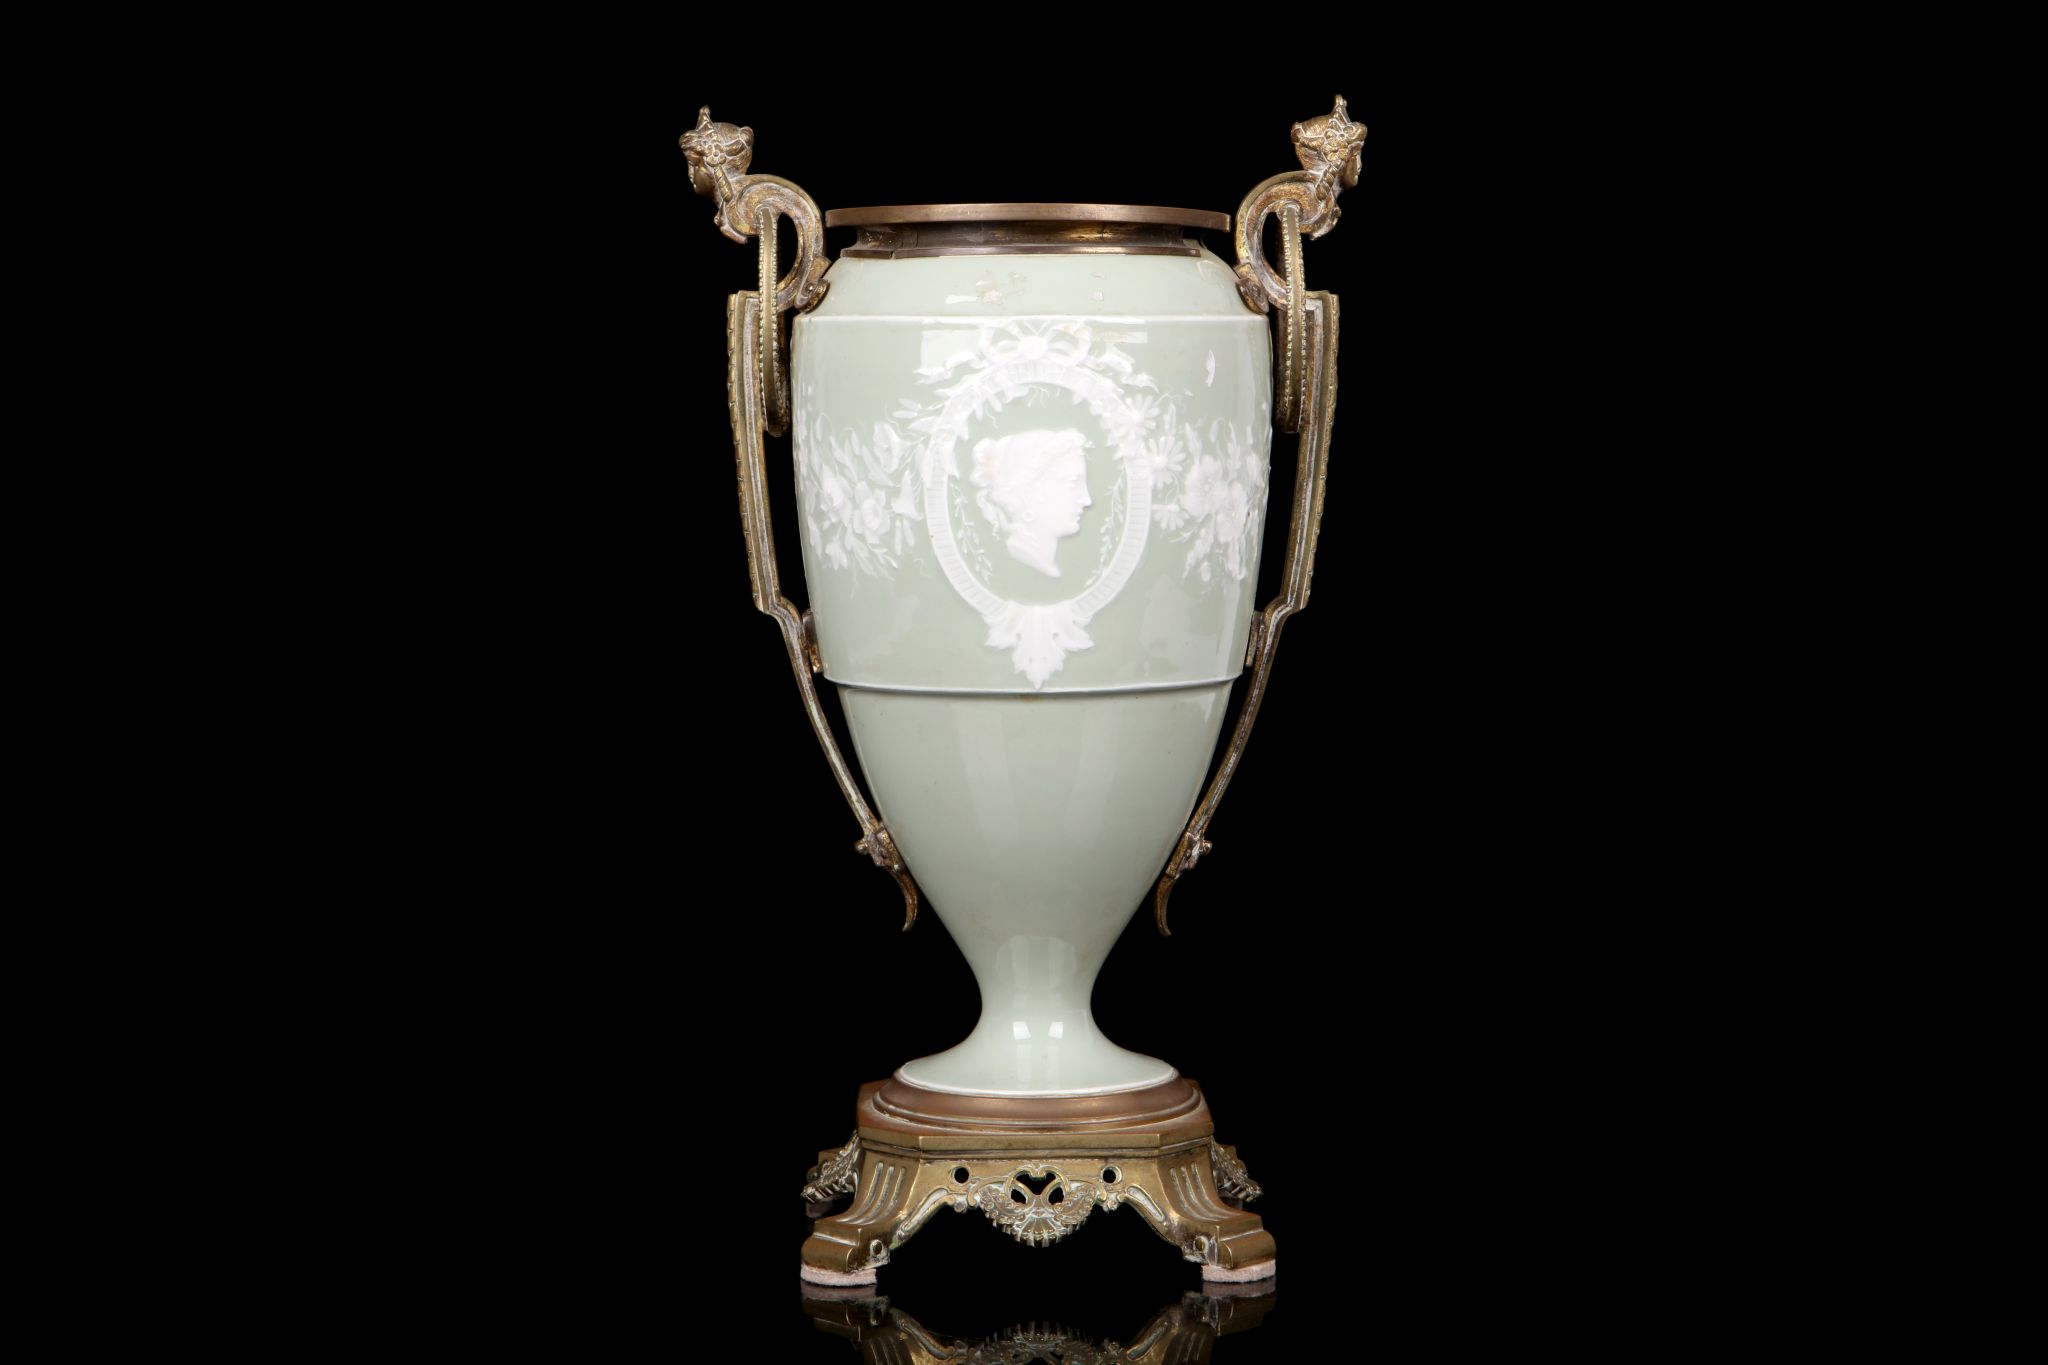 A LATE 19TH CENTURY PATE-SUR-PATE TYPE CELADON URN WITH GILT BRONZE MOUNTS of baluster form, the